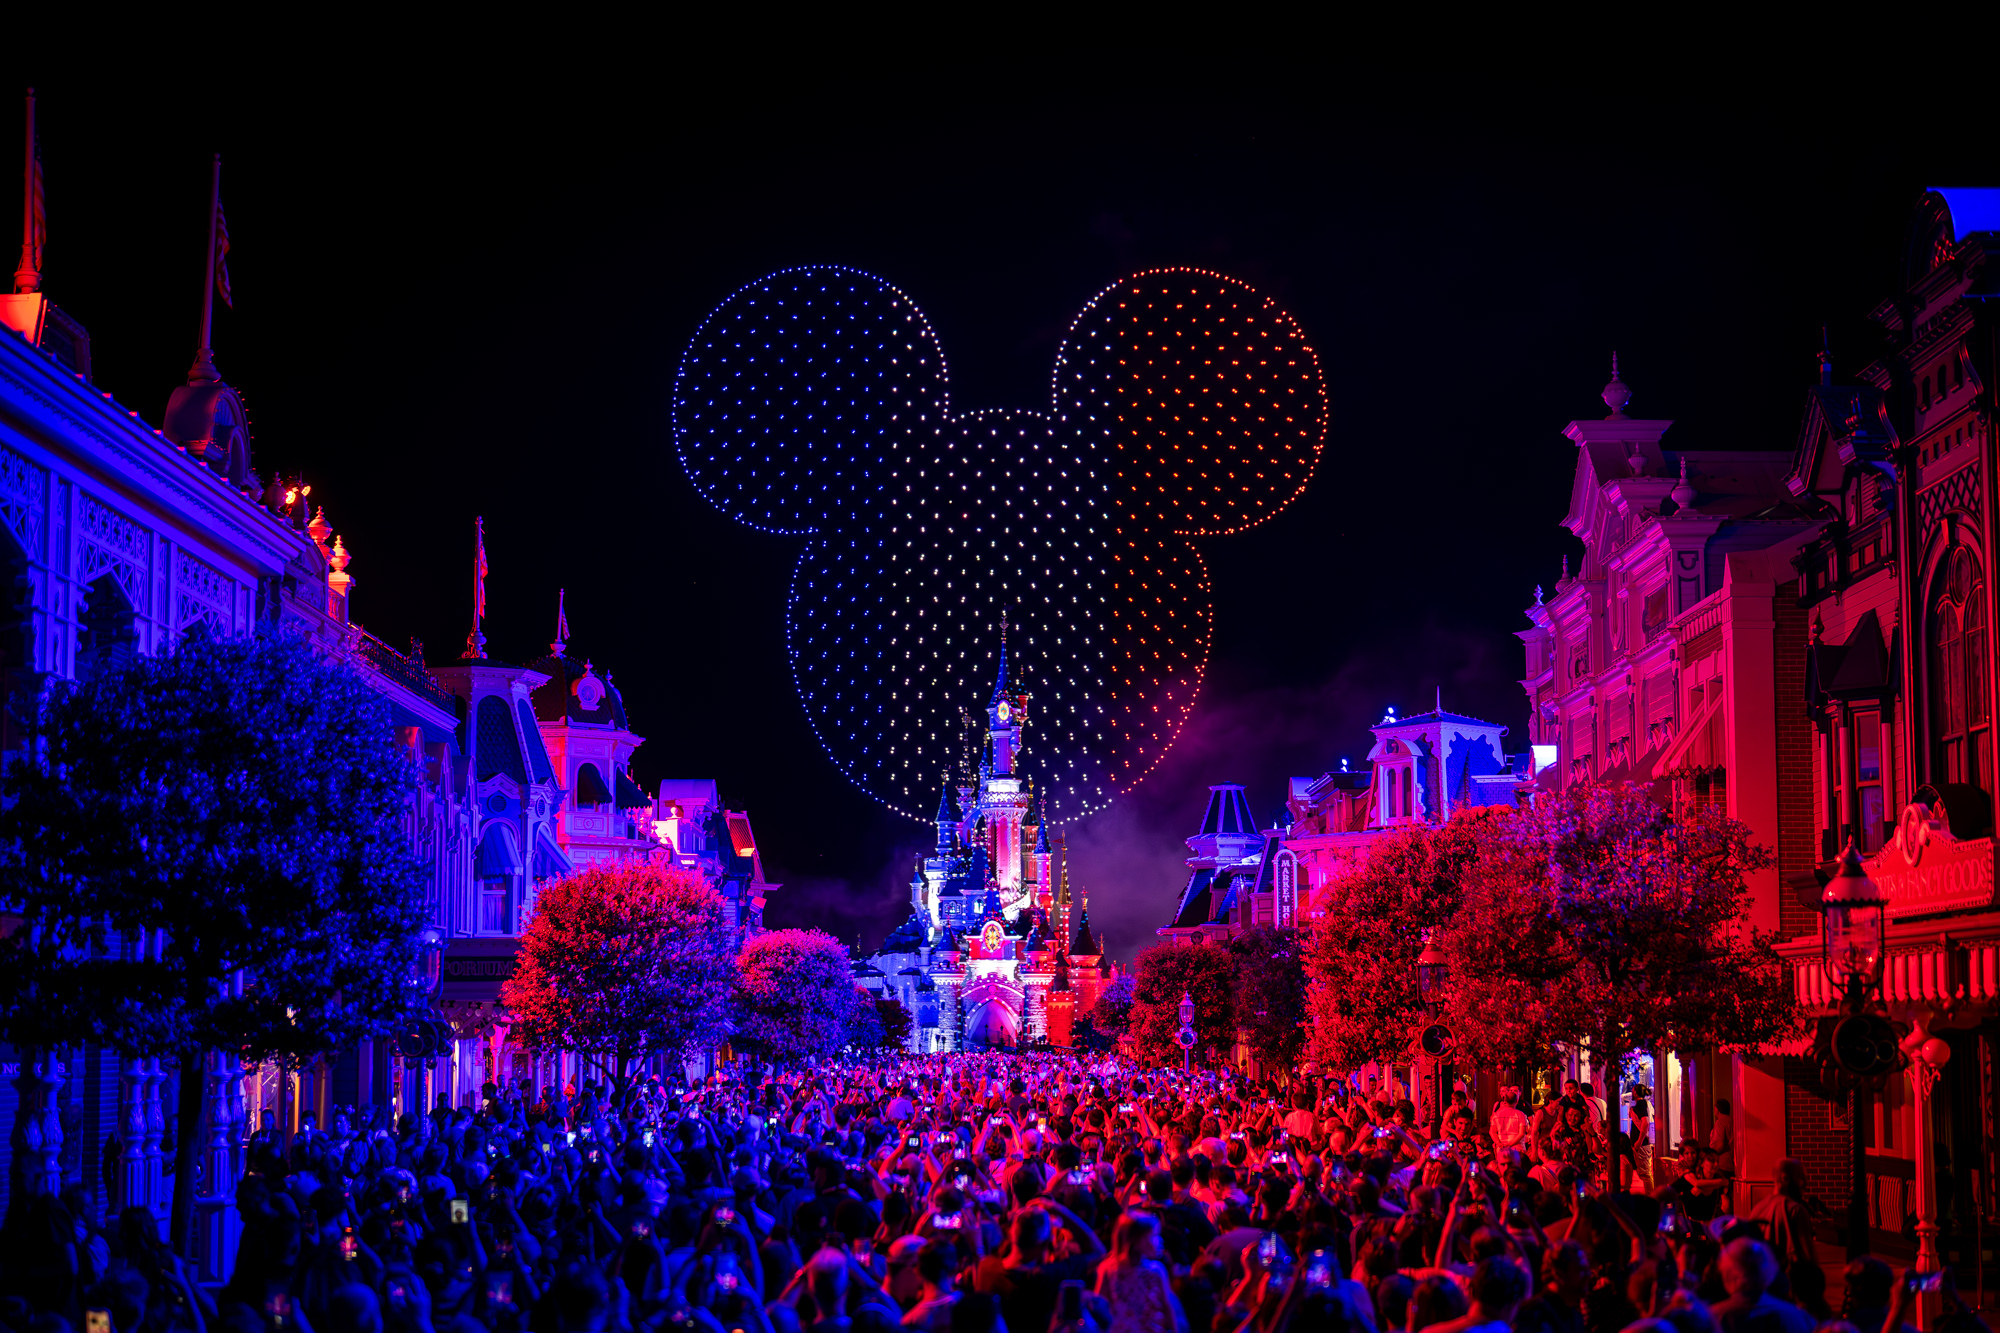 To celebrate Bastille Day, Disneyland Paris presented the Largest Drone Show in Europe, with 1,495 drones.